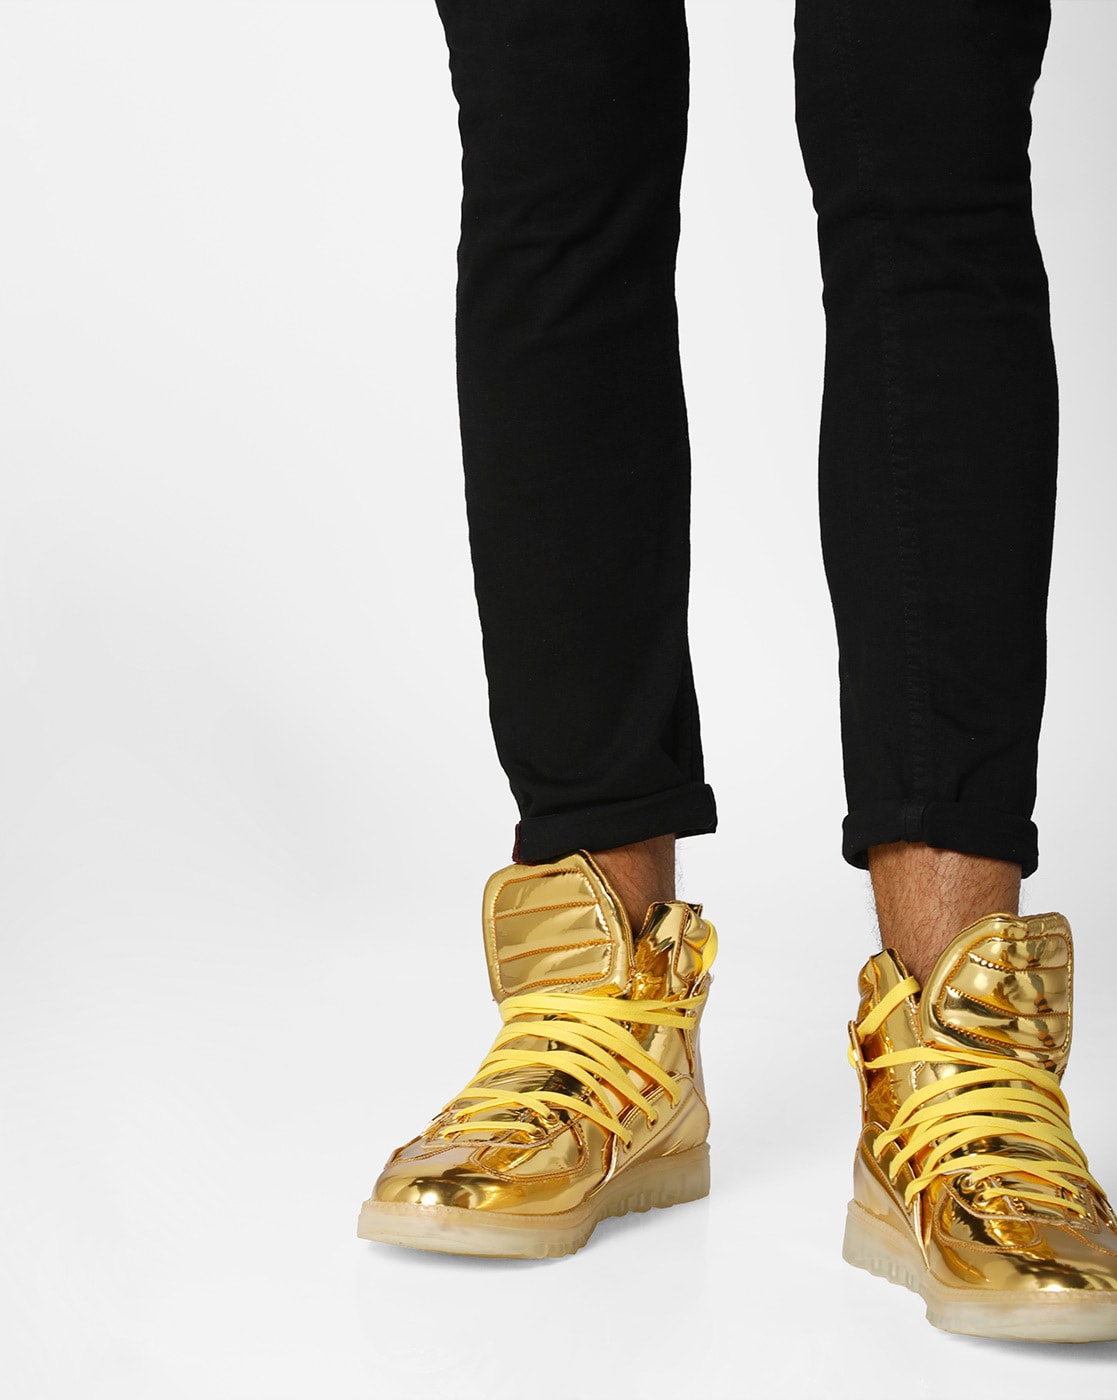 Puma BLK/GOLD SNEAKERS ::PARMAR BOOT HOUSE | Buy Footwear and Accessories  For Men, Women & Kids